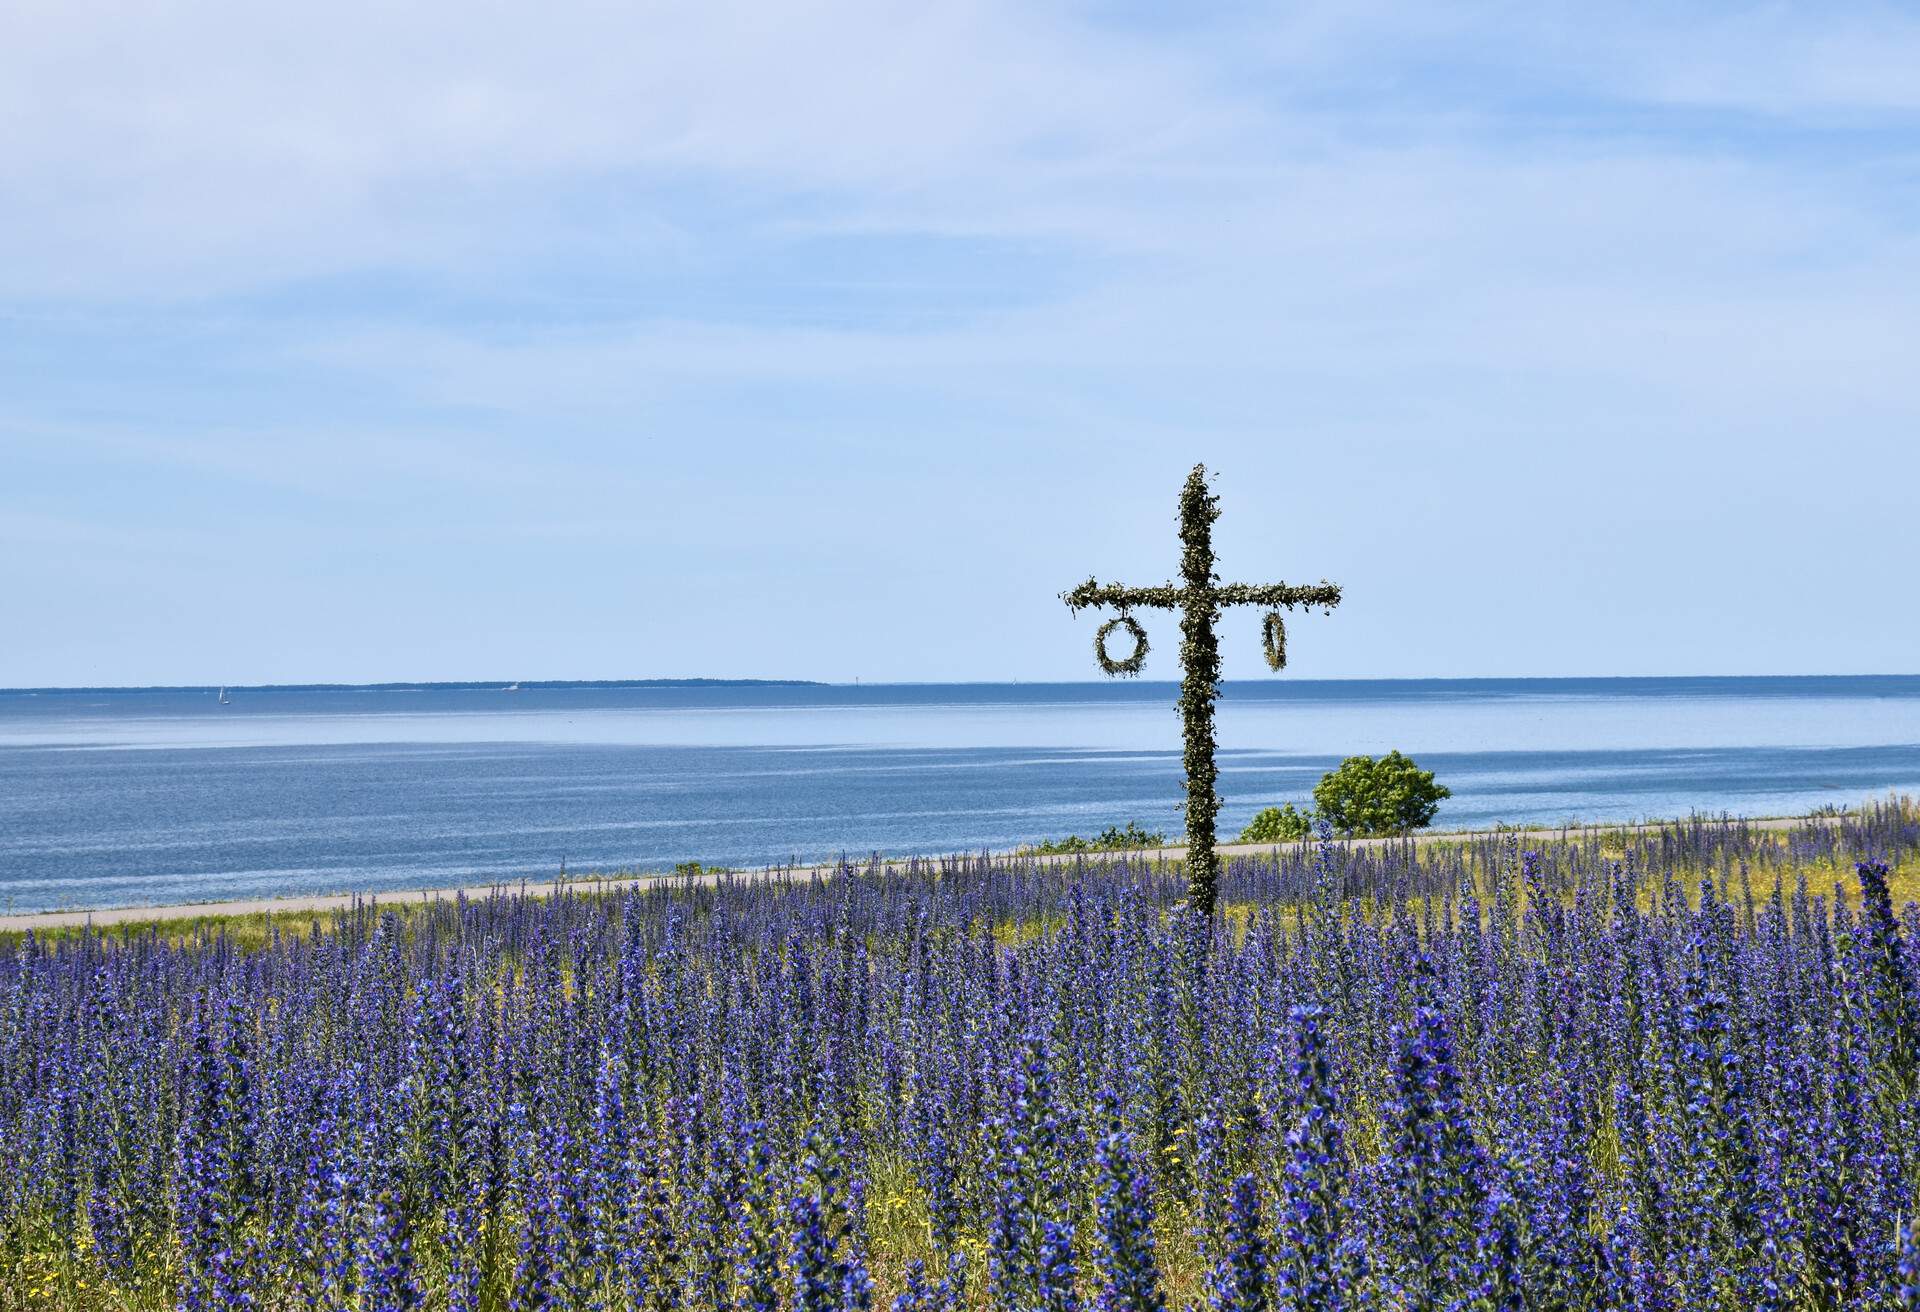 Maypole in a blossom blueweed field by the coast of the Baltic Sea